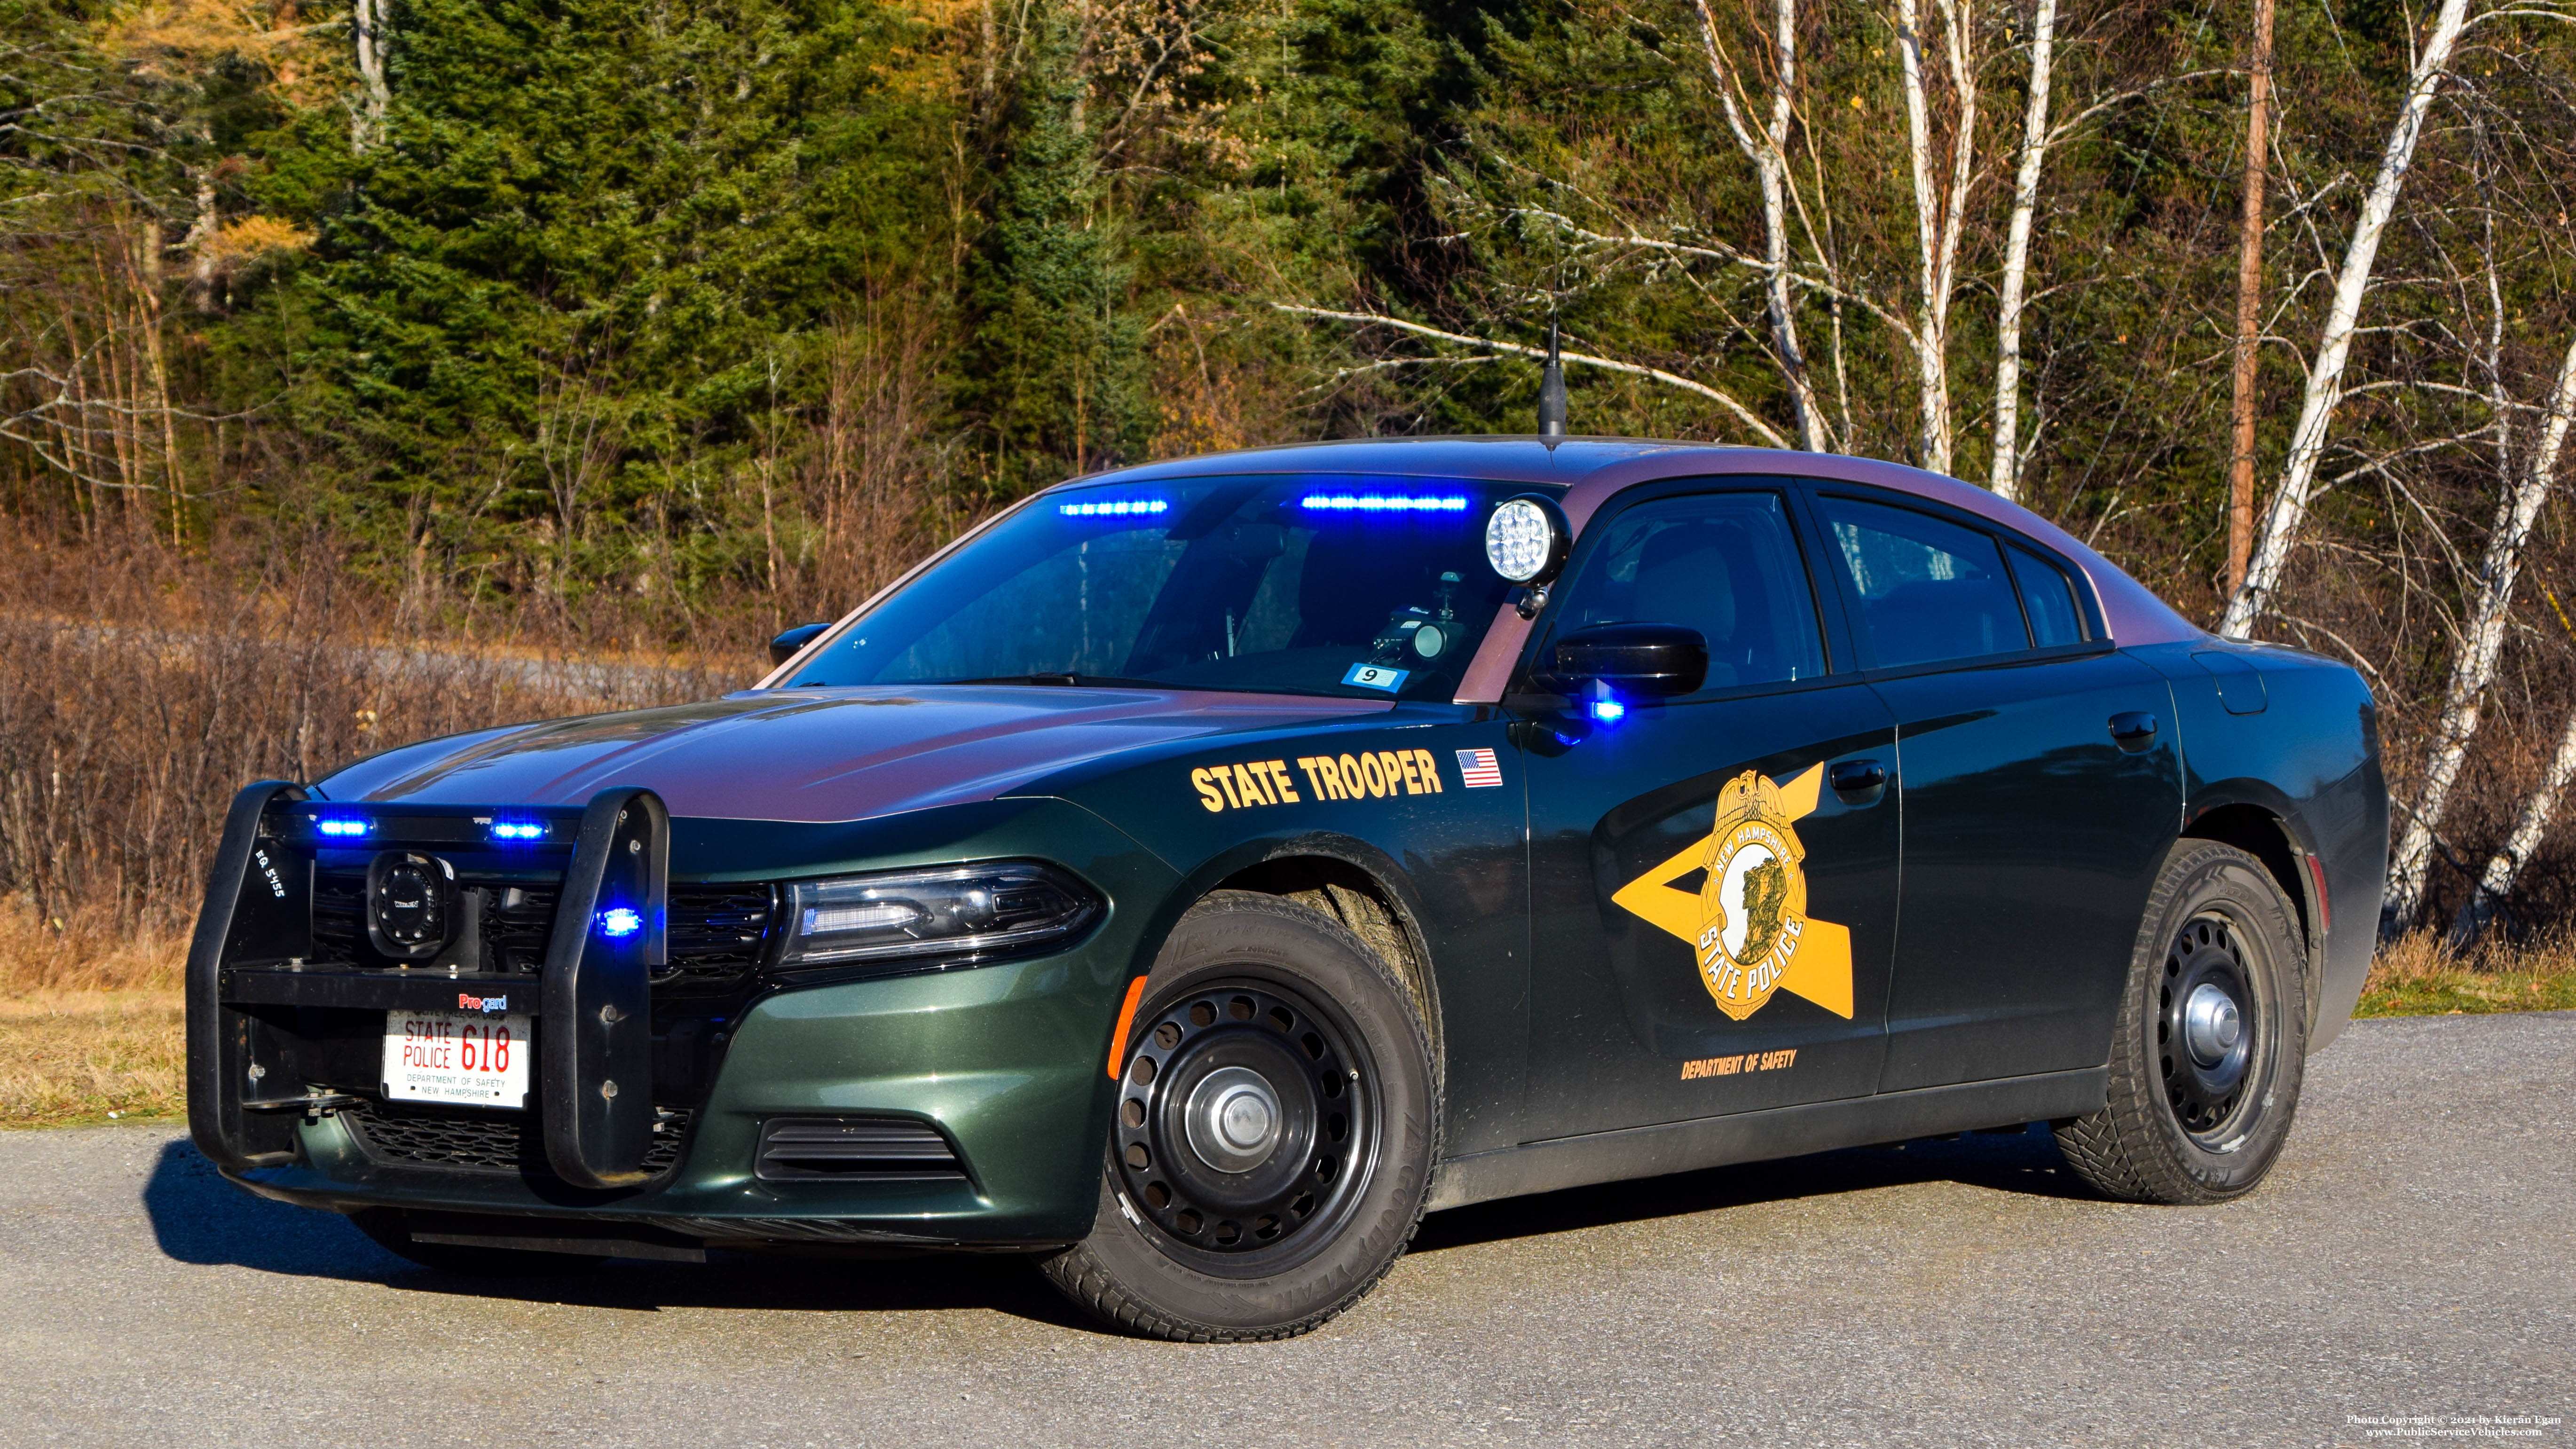 A photo  of New Hampshire State Police
            Cruiser 618, a 2019 Dodge Charger             taken by Kieran Egan